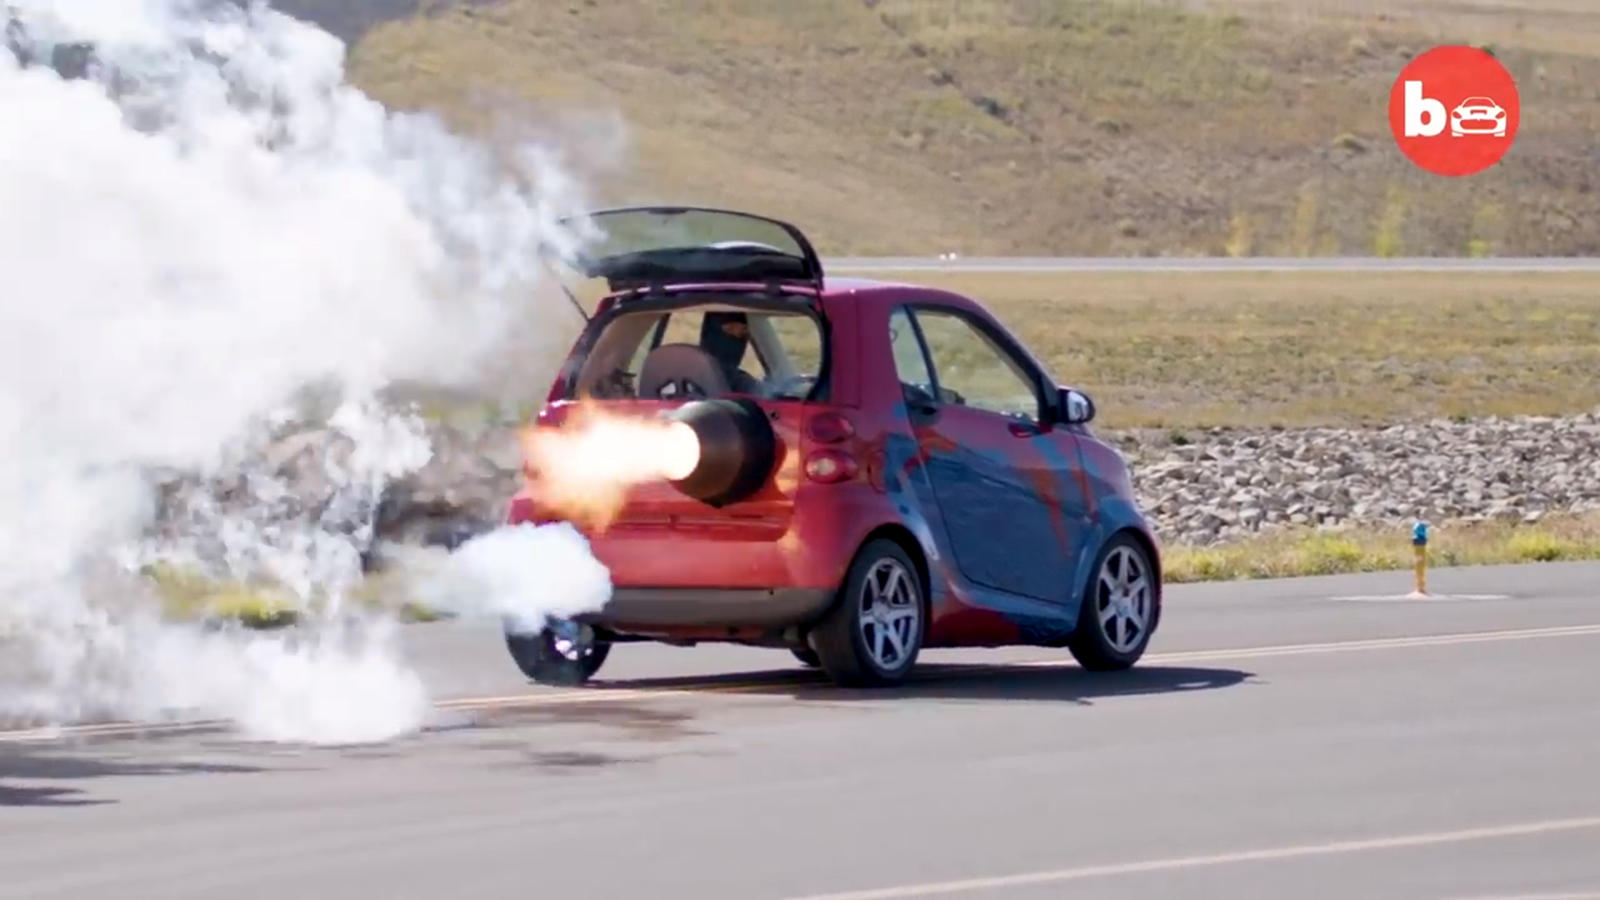 Insane 2000 Hp Jet Powered Smart Car Is Street Legal Carbuzz